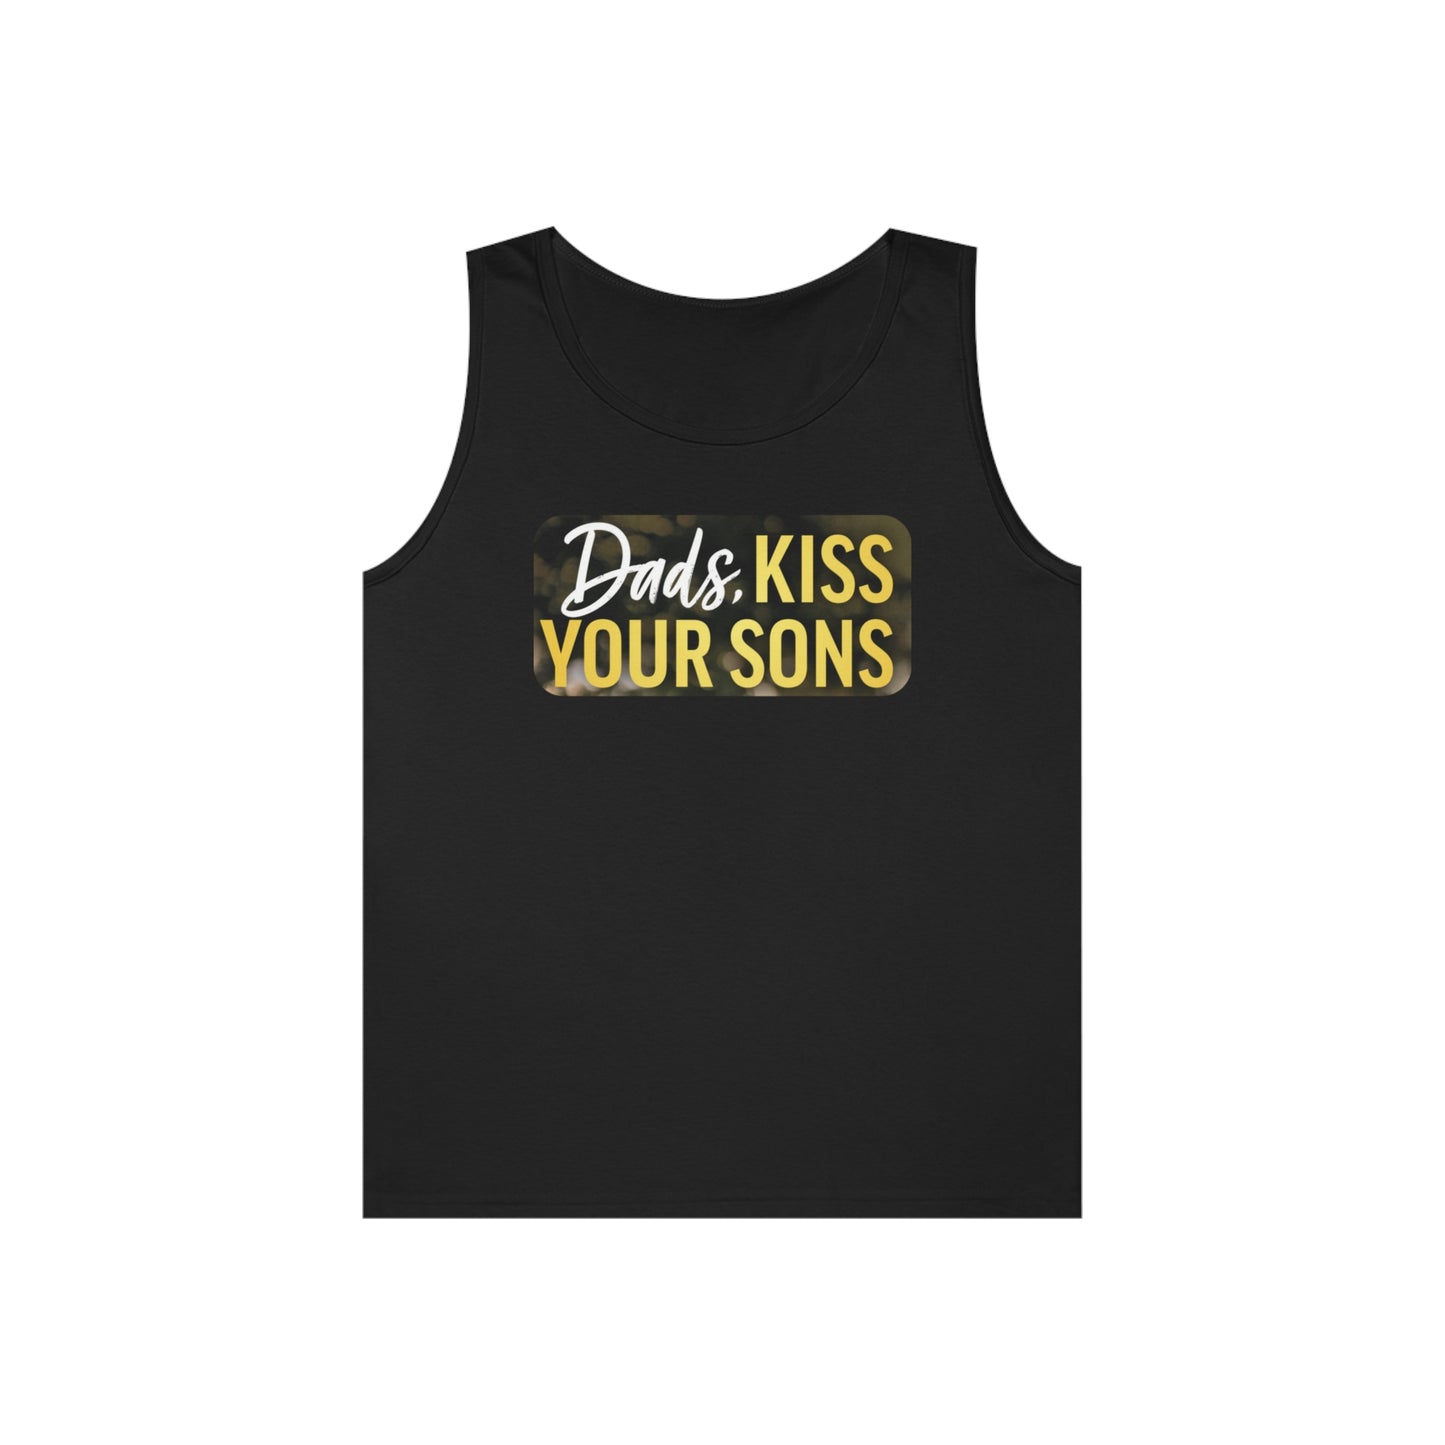 Dads, Kiss Your Sons Unisex Heavy Cotton Tank Top